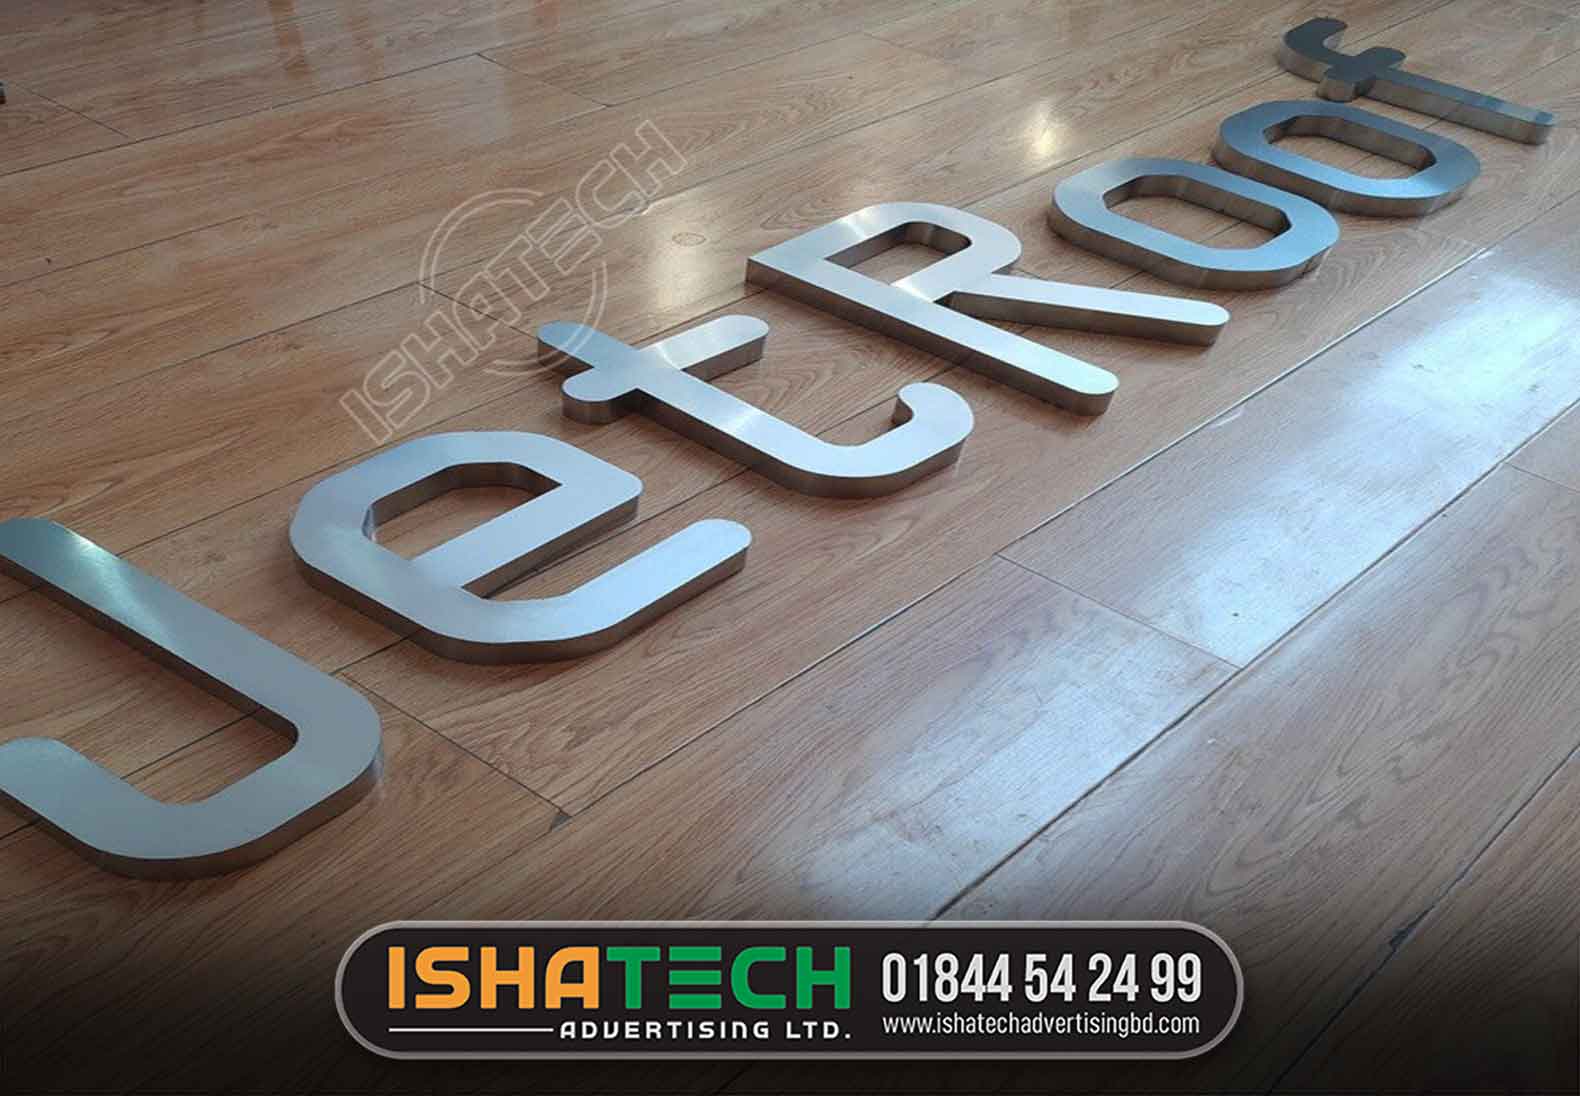 SS LOGO MAKING FOR OFFICE INTERIOR DESIGN IN DHAKA BANGLADESH, Stainless Steel Letters Signage Maker in Dhaka, Logo Design Services in Bangladesh.